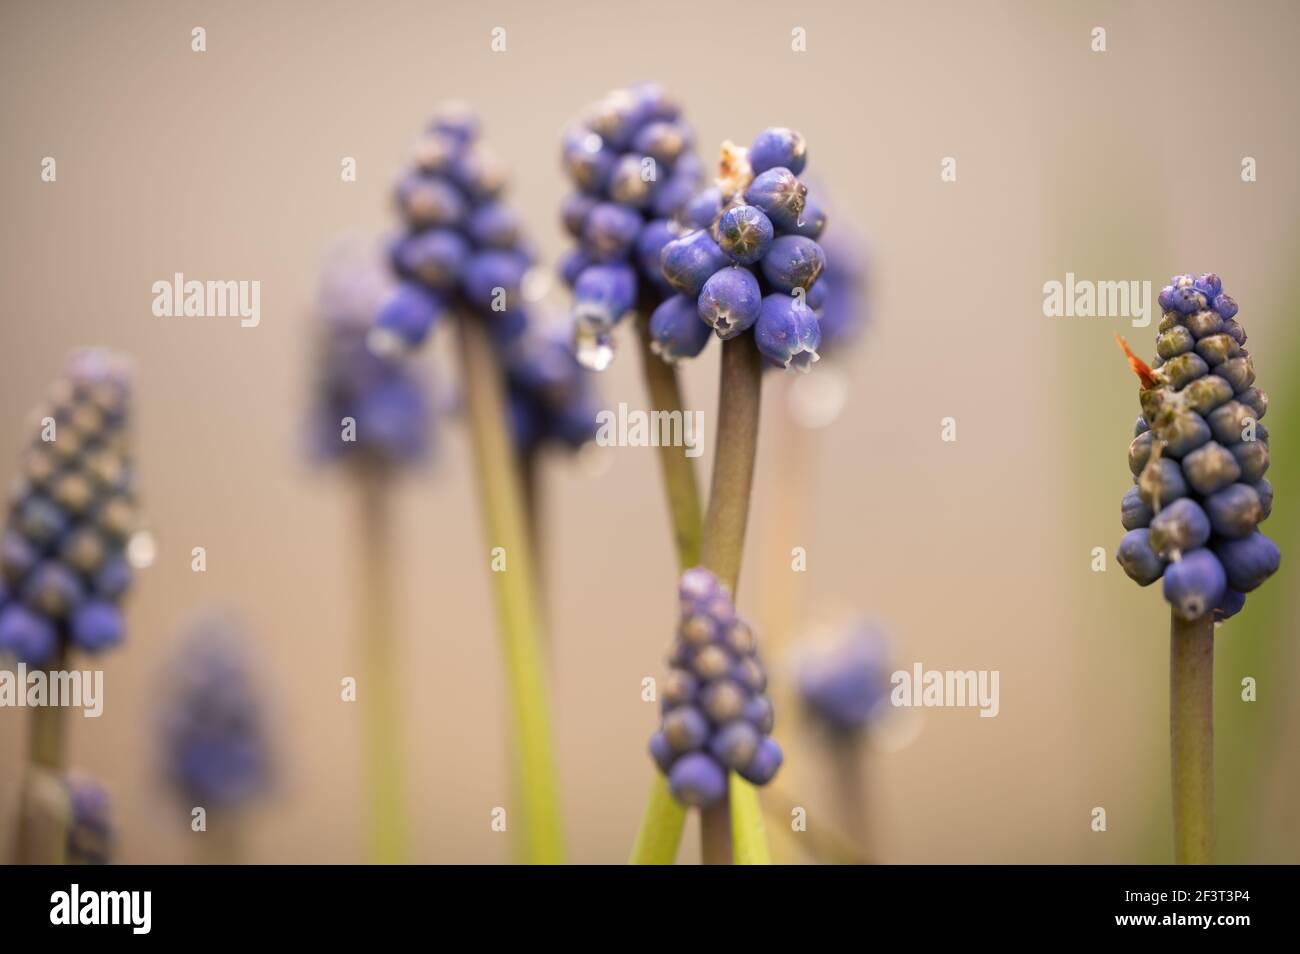 Muscari. Group of grape hyacinths. Close up of bluebells. Beauty in nature. Stock Photo